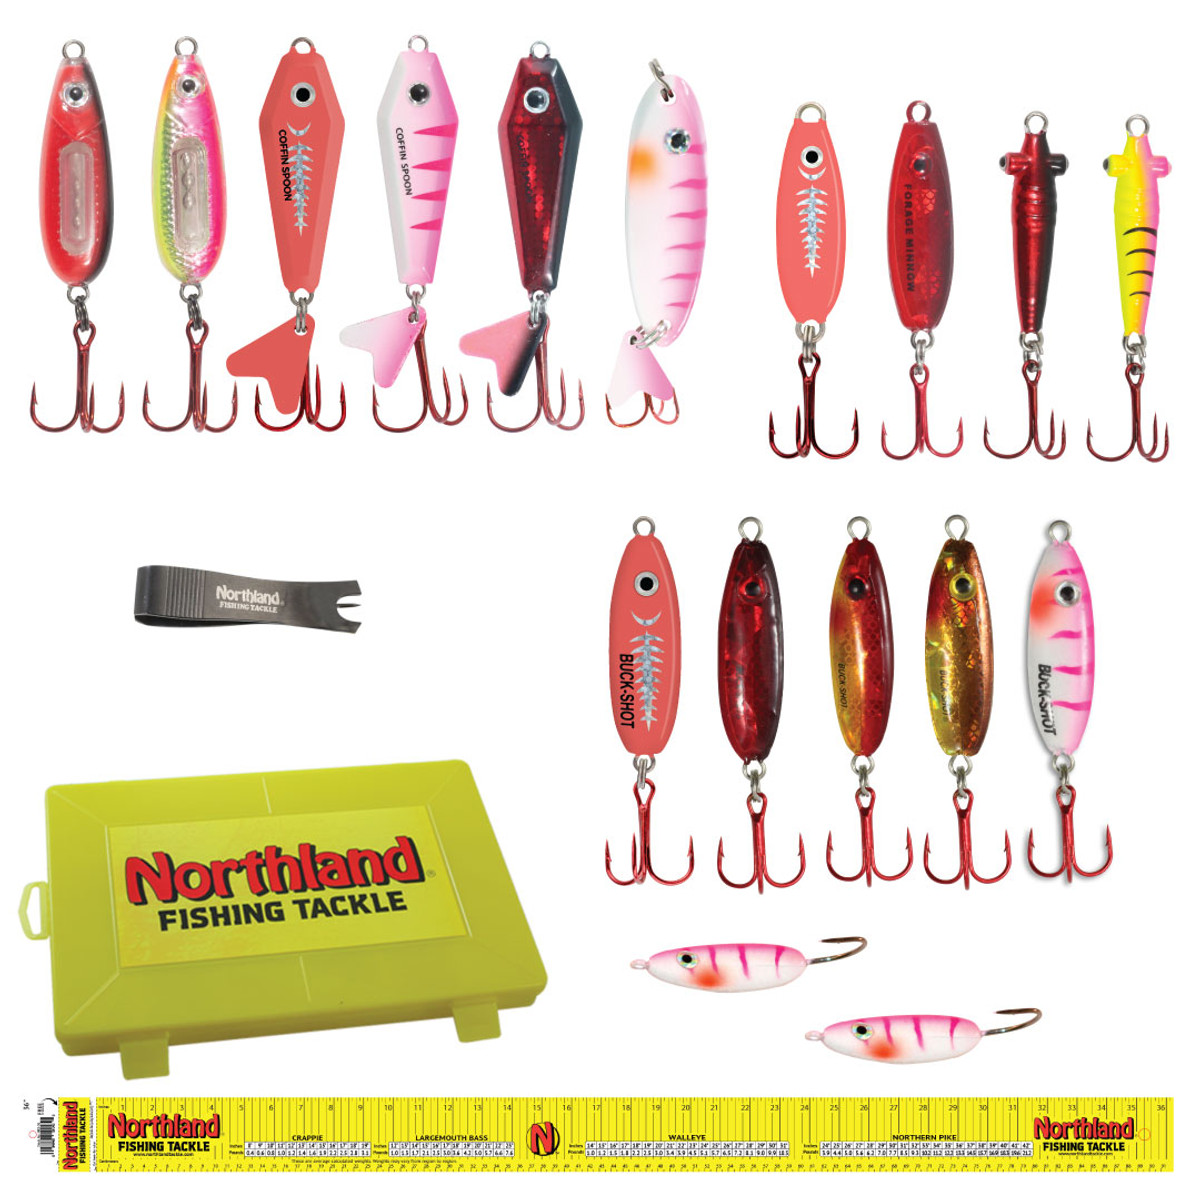 Northland Fishing Tackle Red and White Jawbreaker Spoon Fishing Lure -  JBS-91